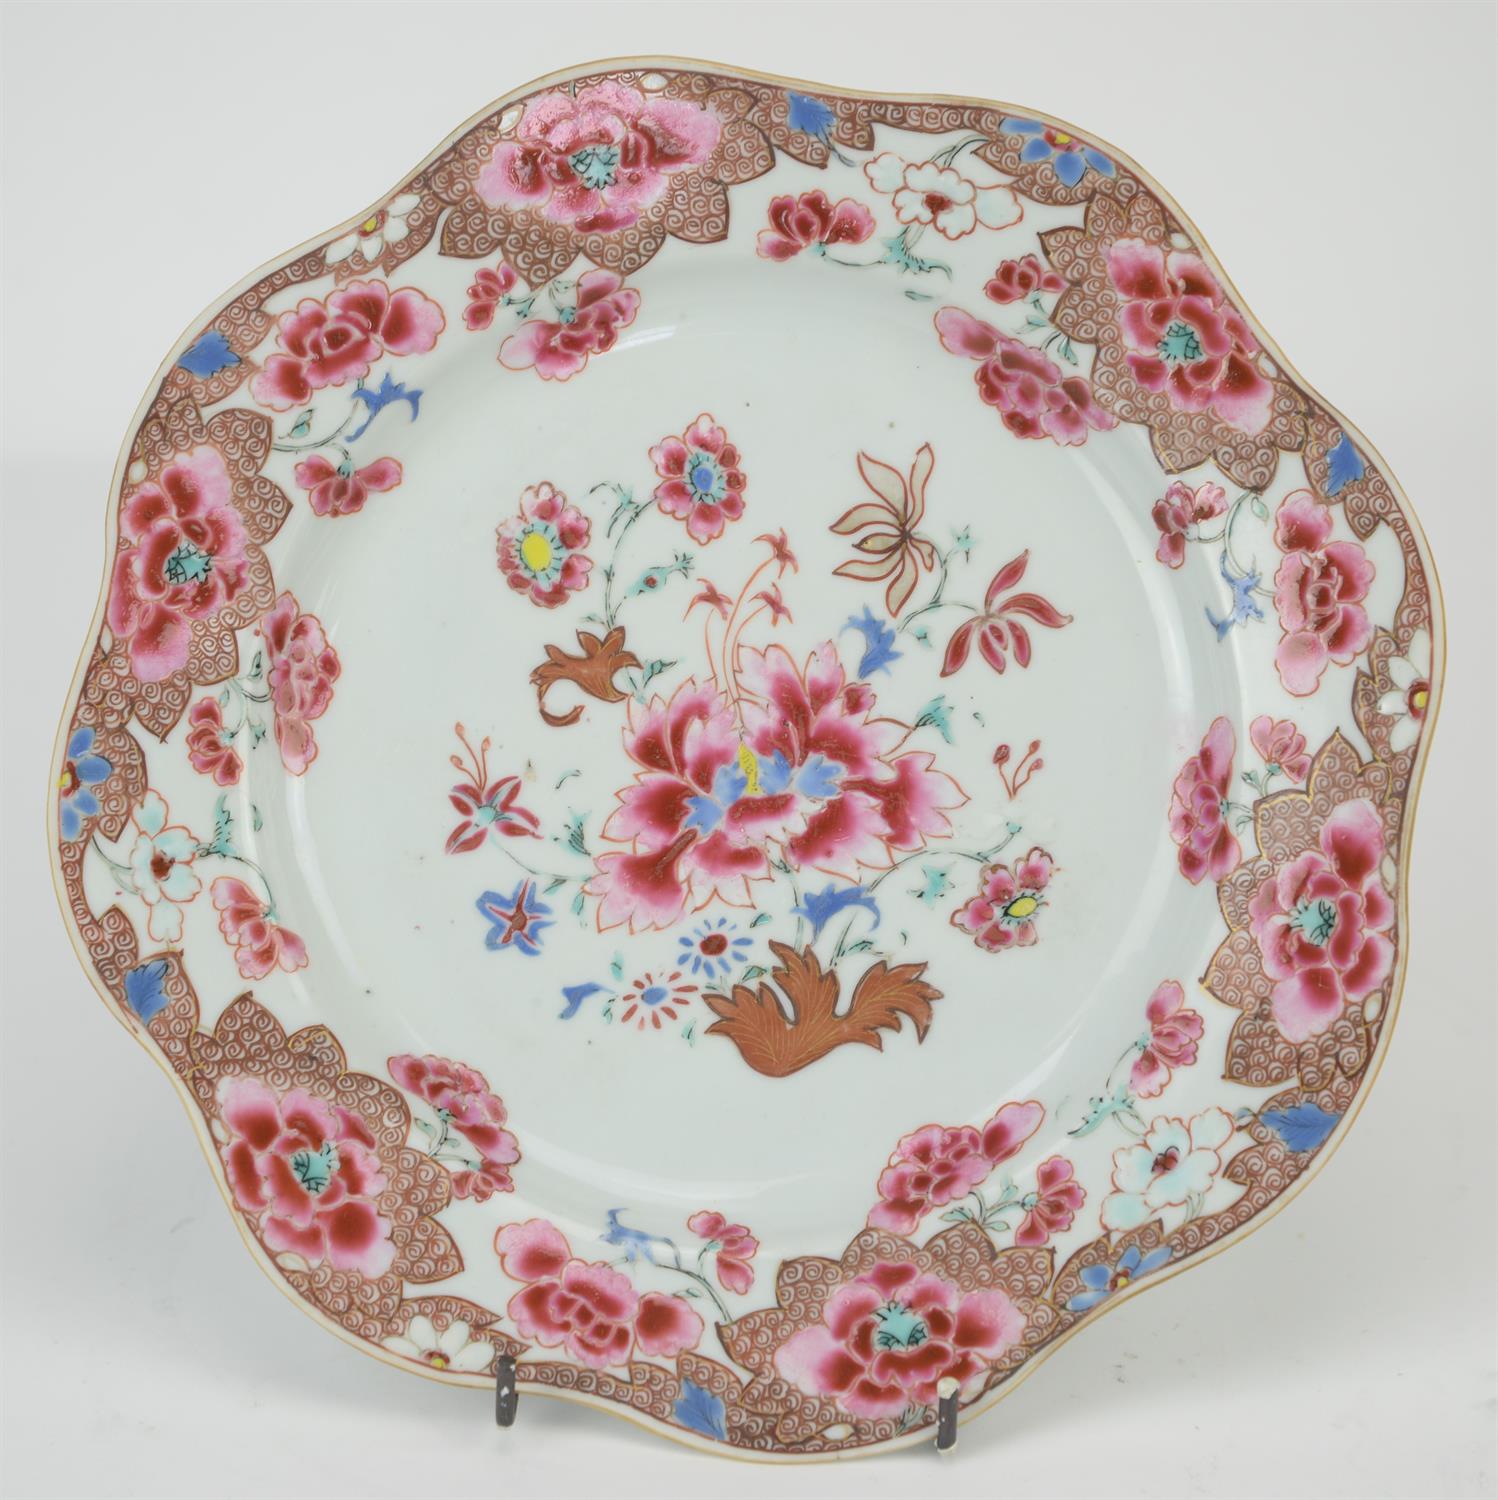 Eight famille rose dishes; each one decorated with floral designs and about 22.5 cm diameter, - Image 27 of 28